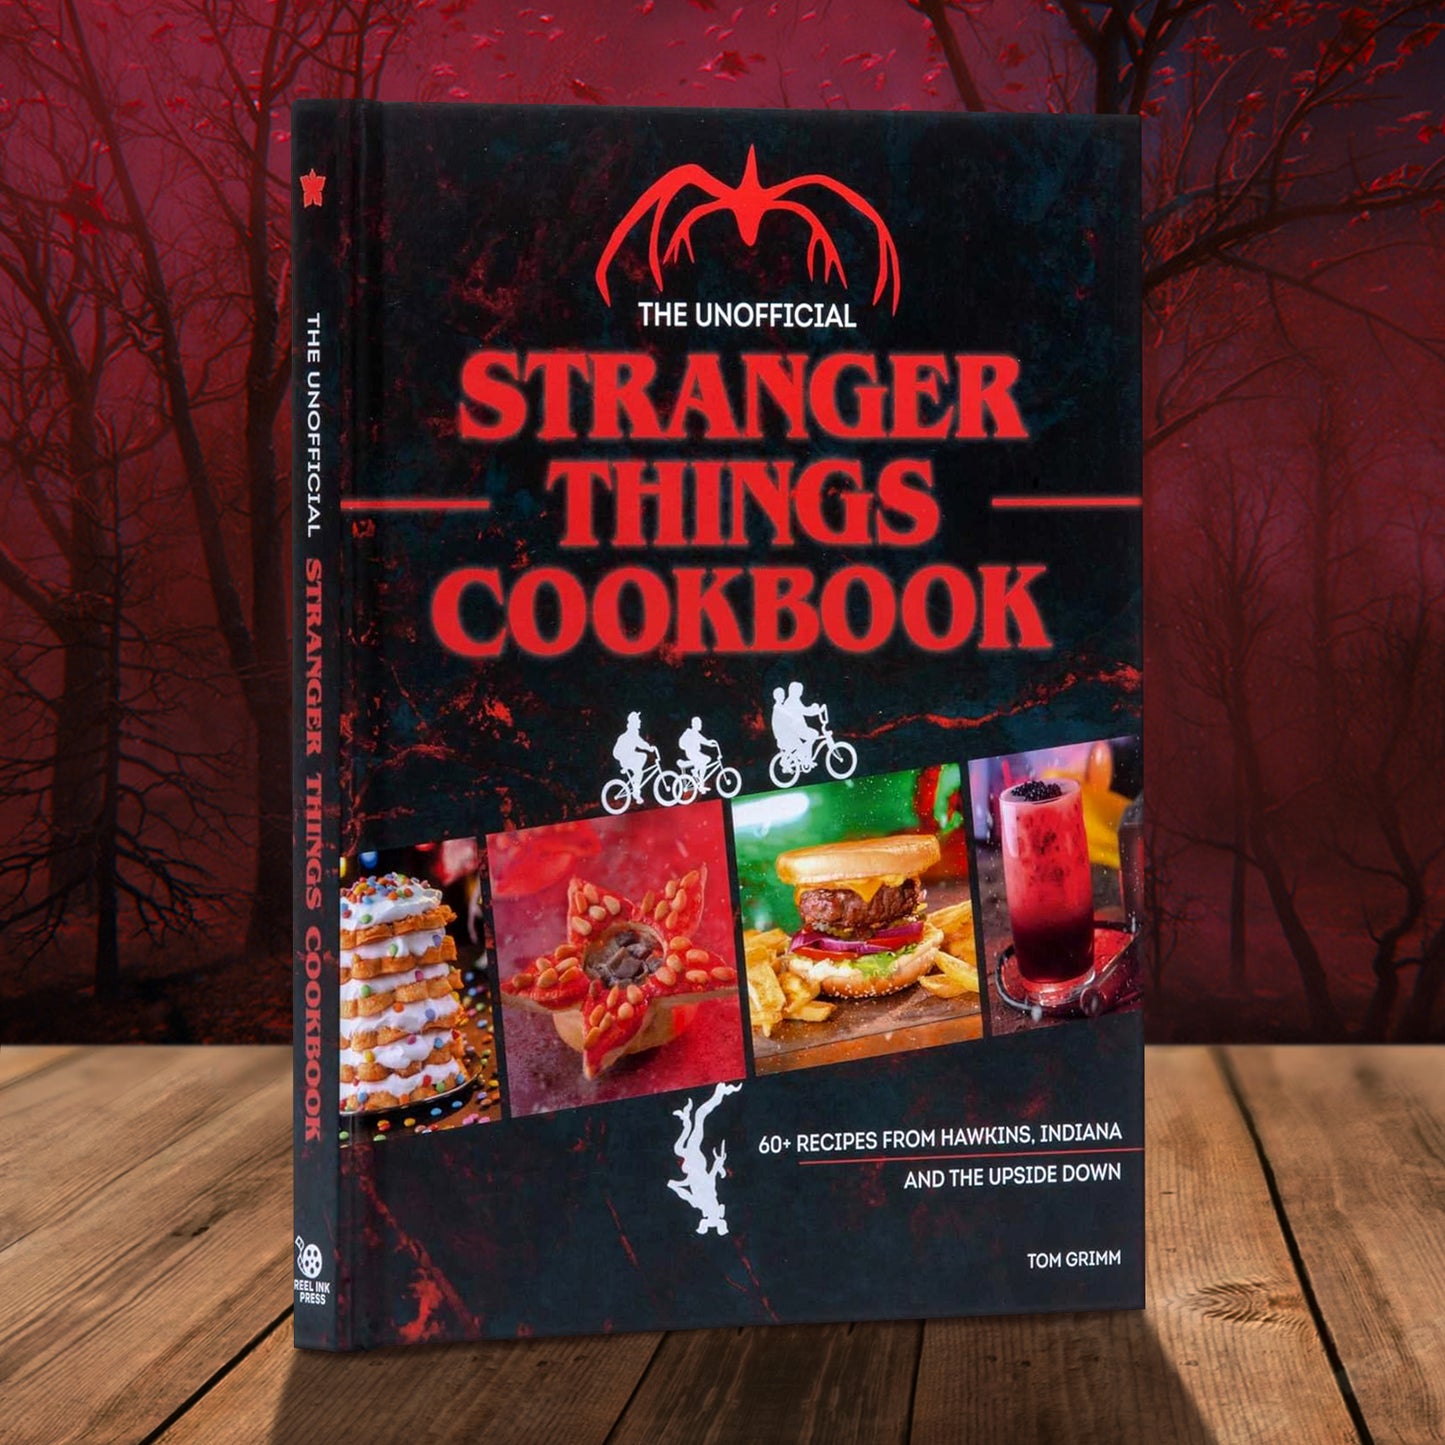 A red and black book on a wood table. Red and white text at the top says "The unofficial stranger things cookbook." A red silhouette of a menacing creature sits above the title. Images of recipes from the book stretch across the bottom, with white silhouettes of kids on bicycles riding across. Below them is an upside down white silhouette of a demogorgon from the series. Behind the book is a dark forest in red and black tones.